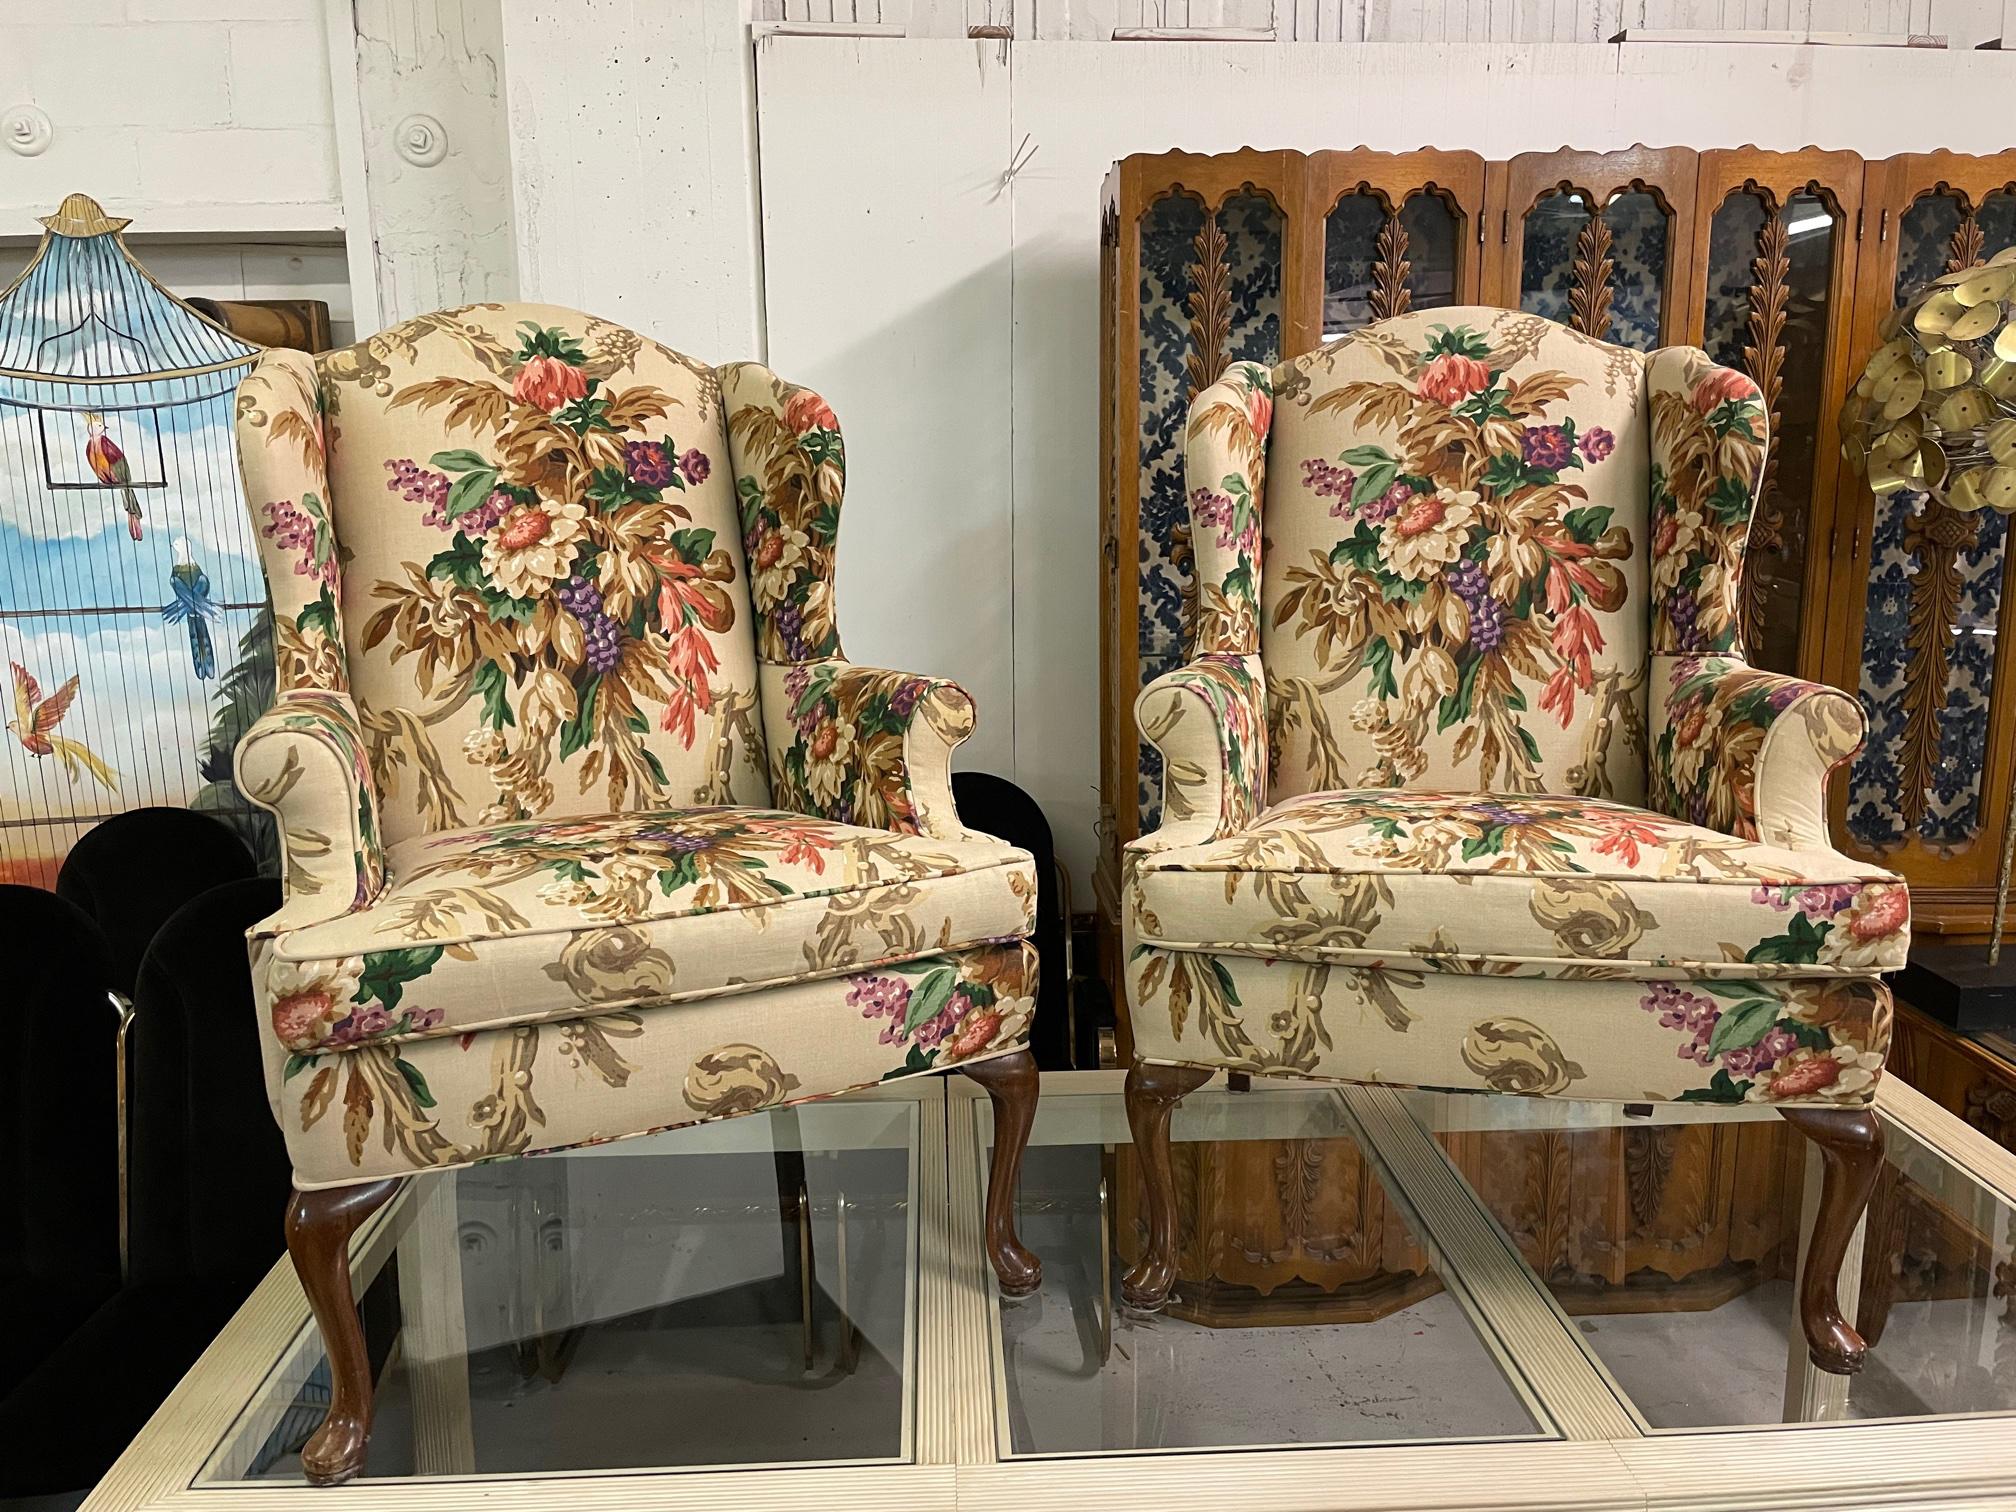 Pair of vintage wingback chairs upholstered in a colorful floral upholstery. Solid construction and only very minor imperfections consistent with age. No odors, stains or holes in fabric.

 